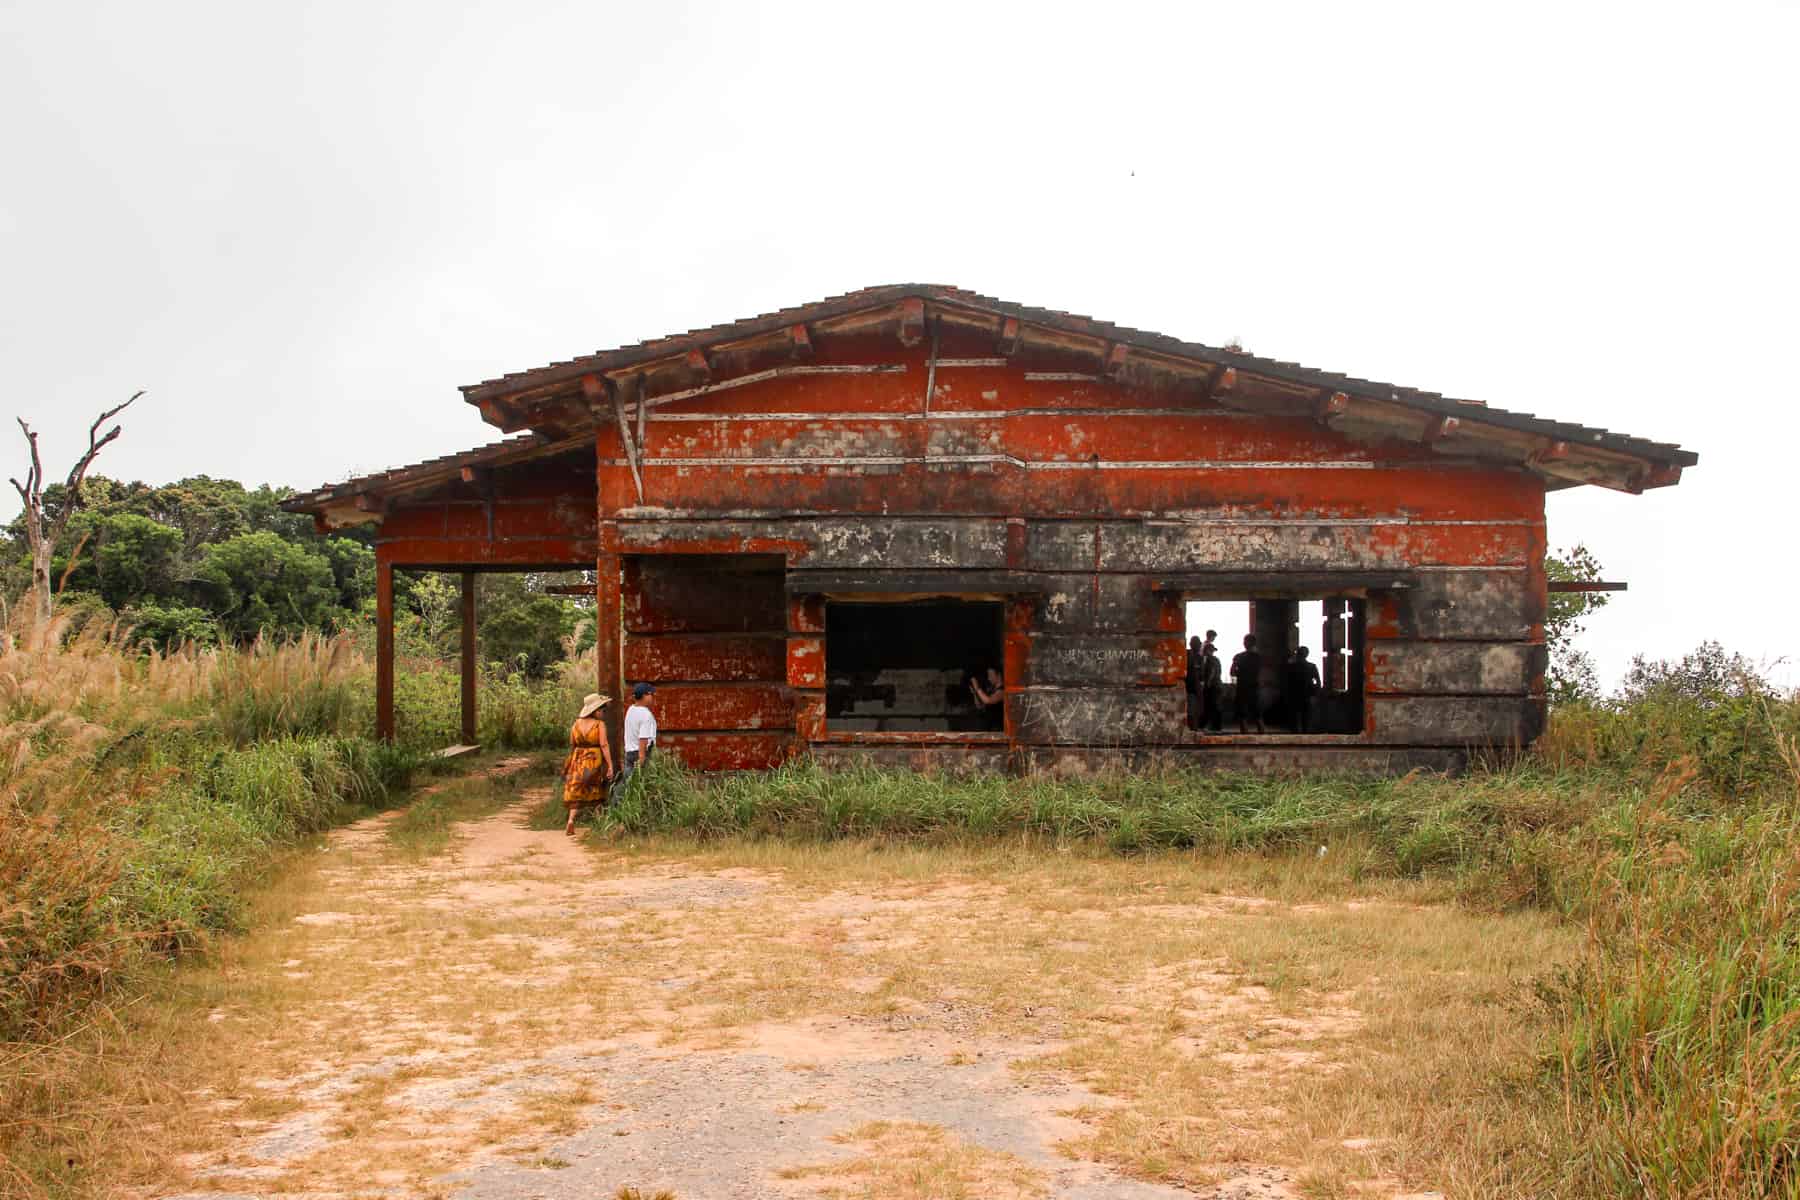 A woman in an orange dress and a man in white enter an abandoned red brick building within rugged green grassland on a hill.